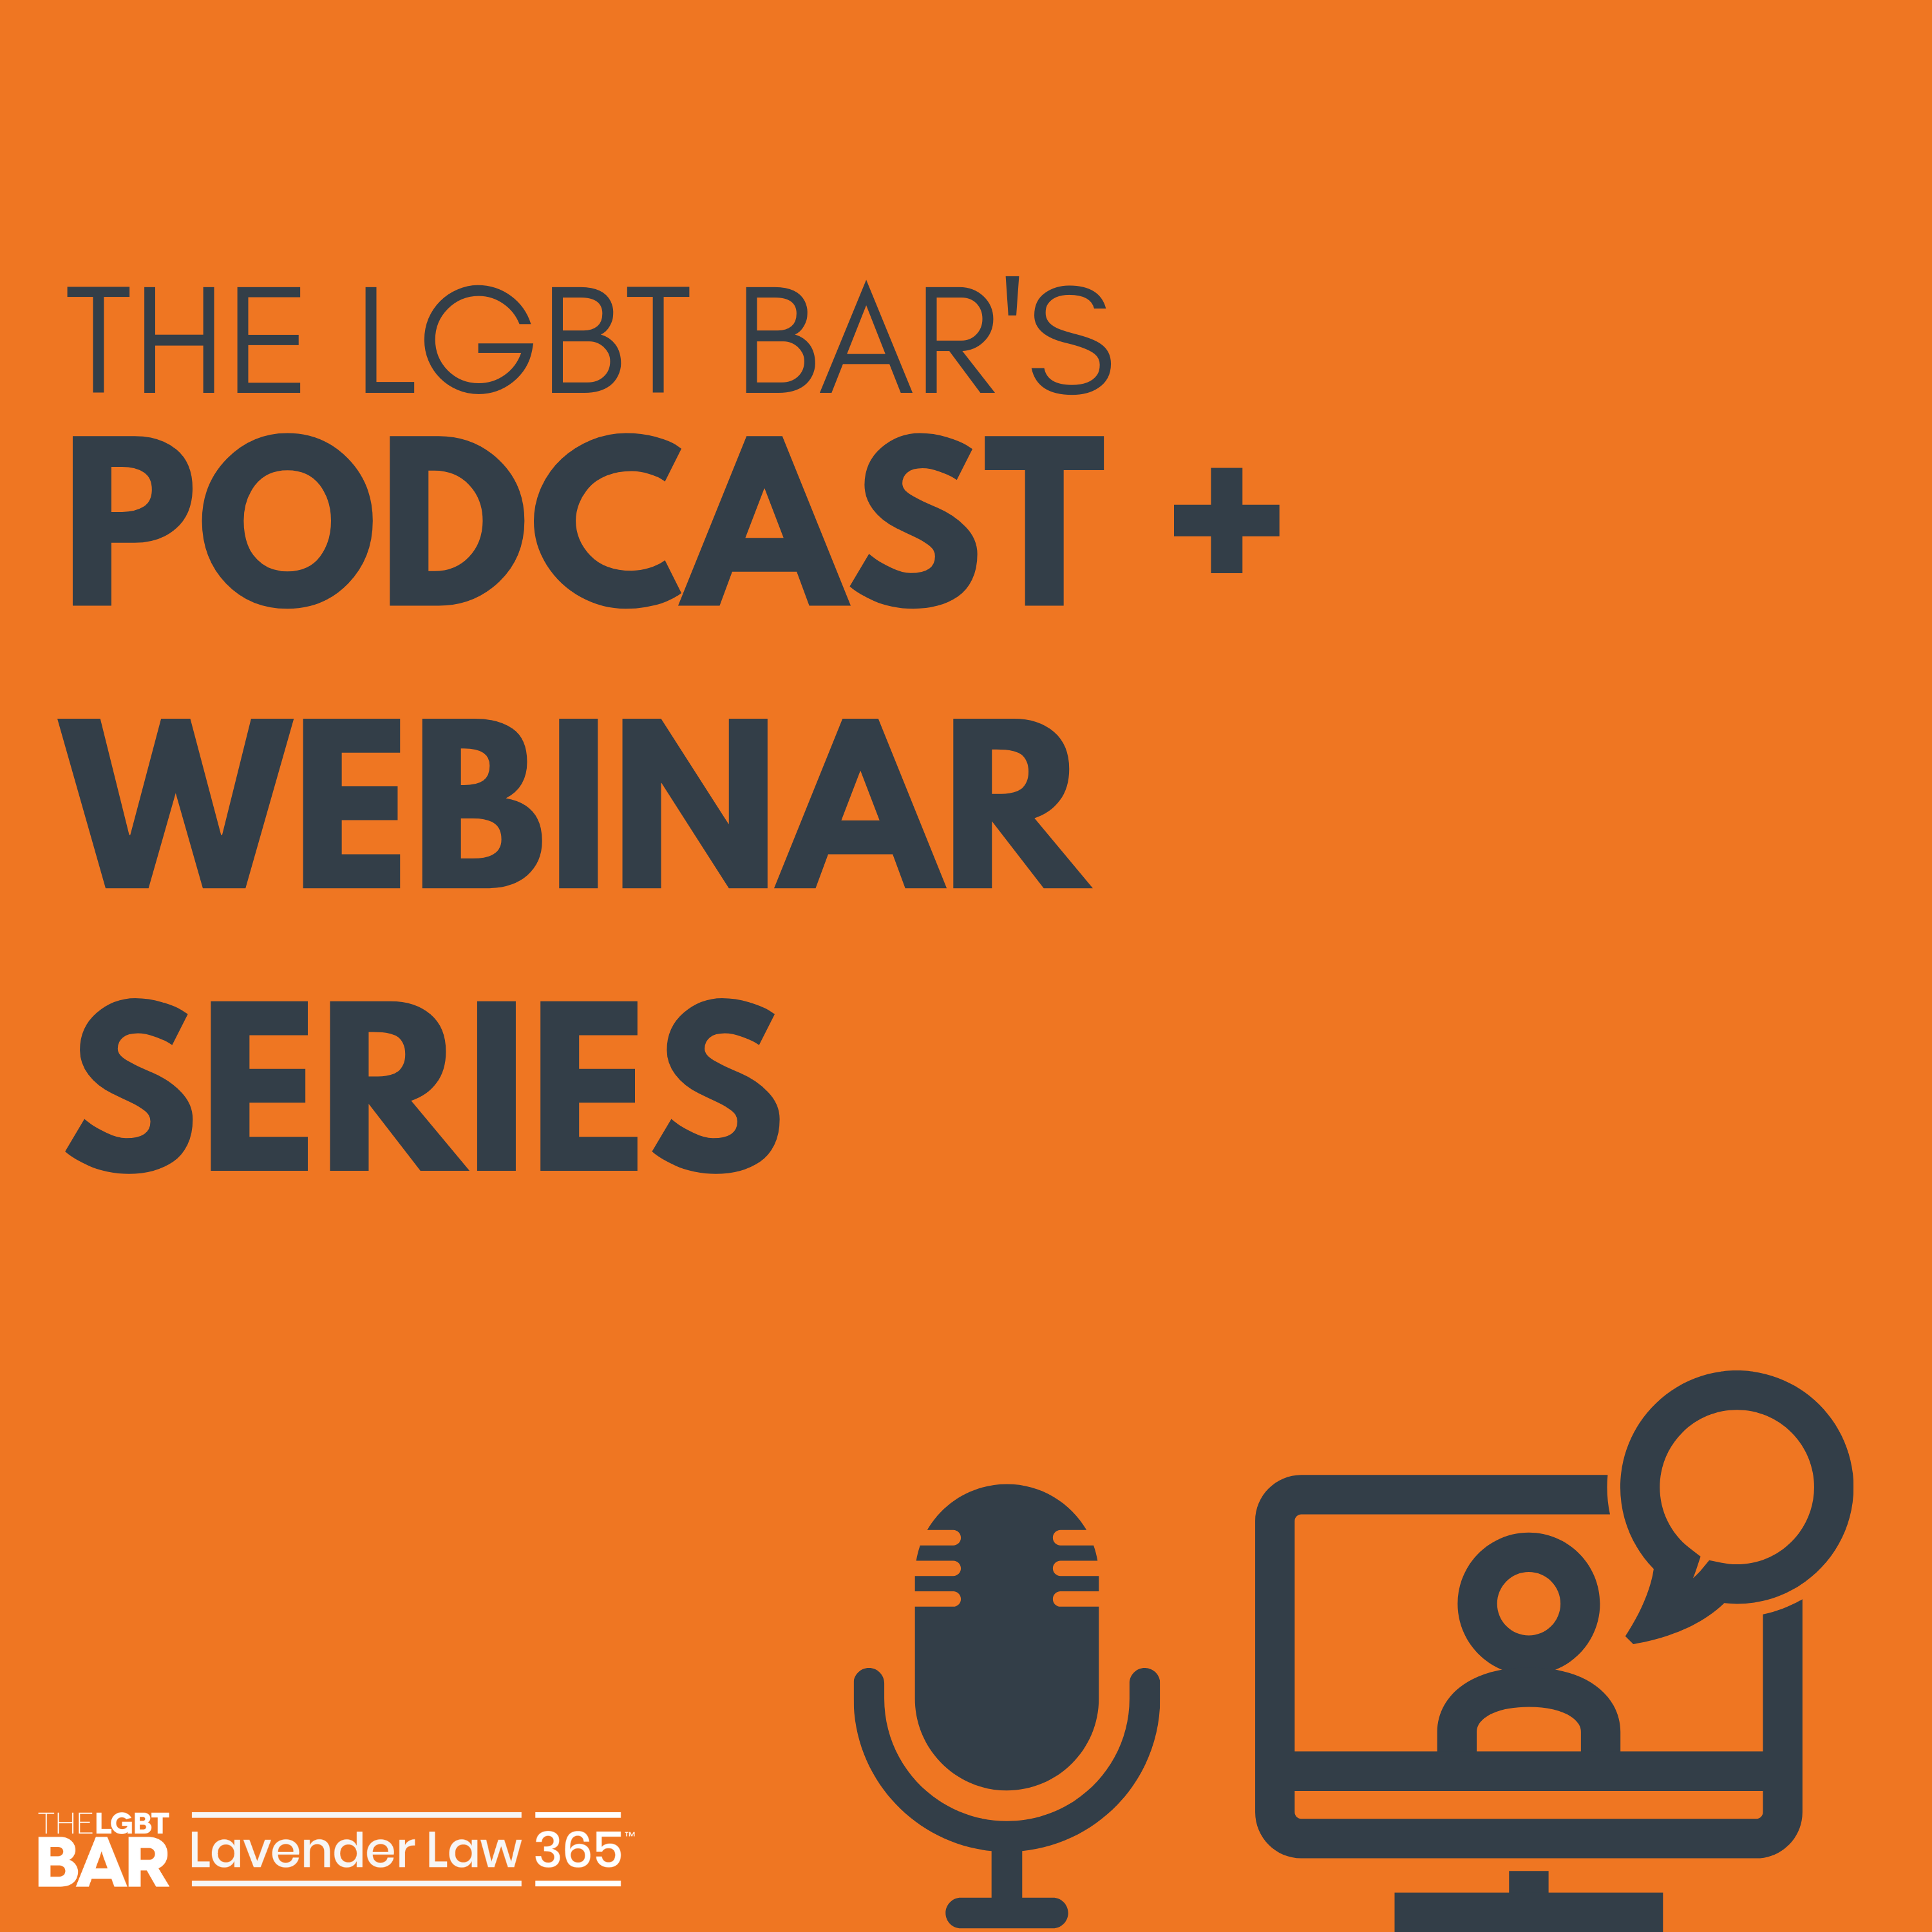 The LGBT Bar's Podcast and Webinar Series